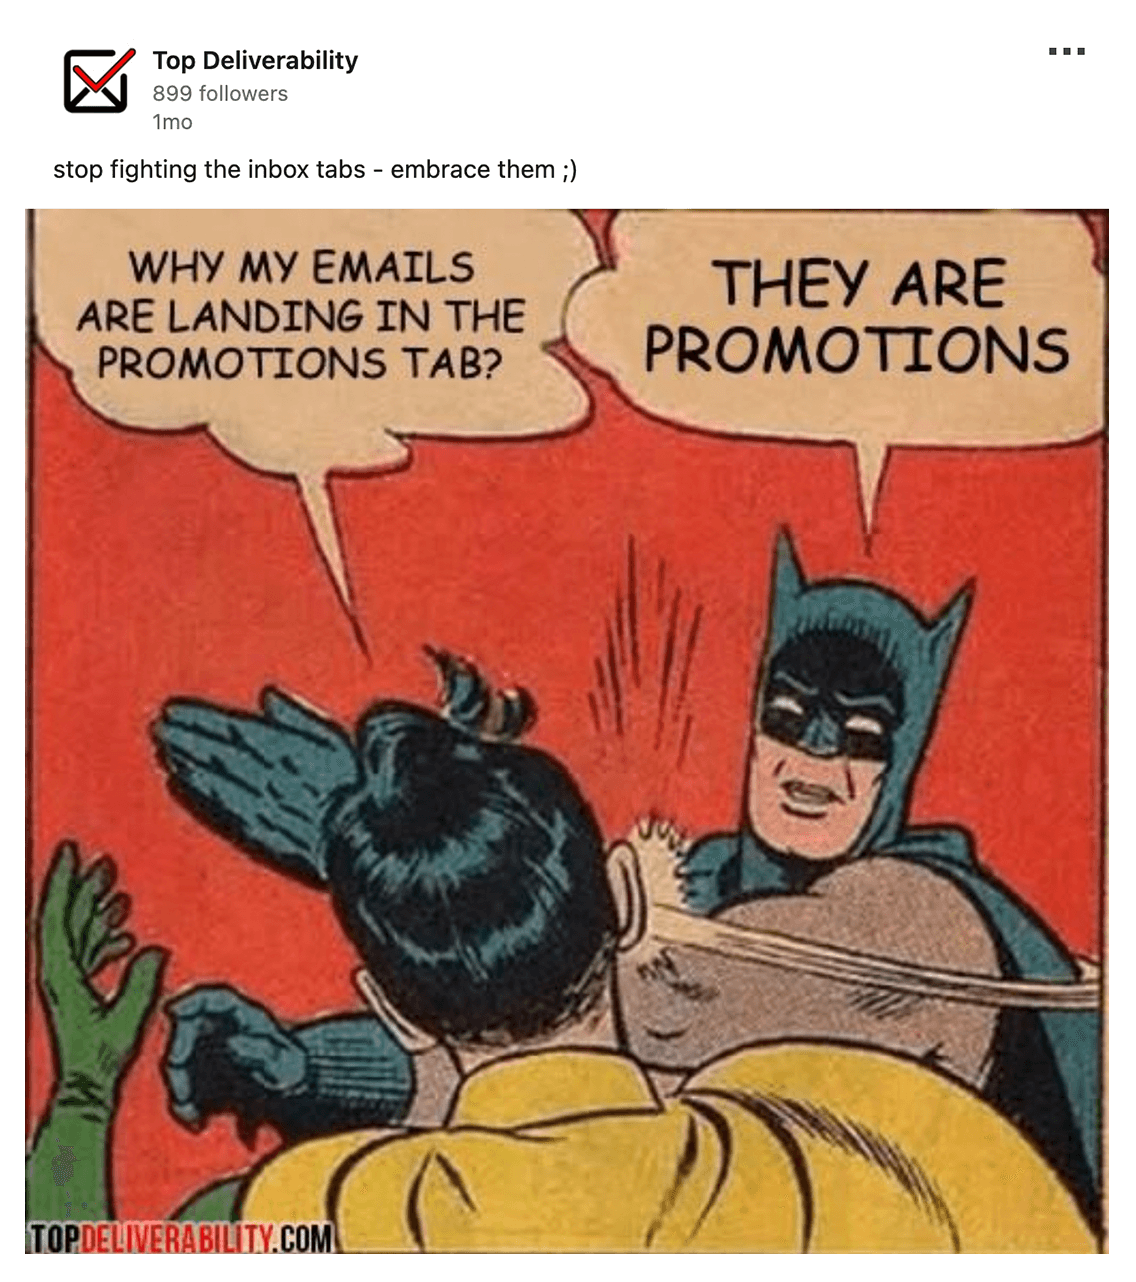 Top Deliverability on LinkedIn says, 'stop fighting the inbox tabs - embrace them' with a Batman comic strip meme that says, 'Why my emails are landing in the promotions tab?' 'They are promotions'